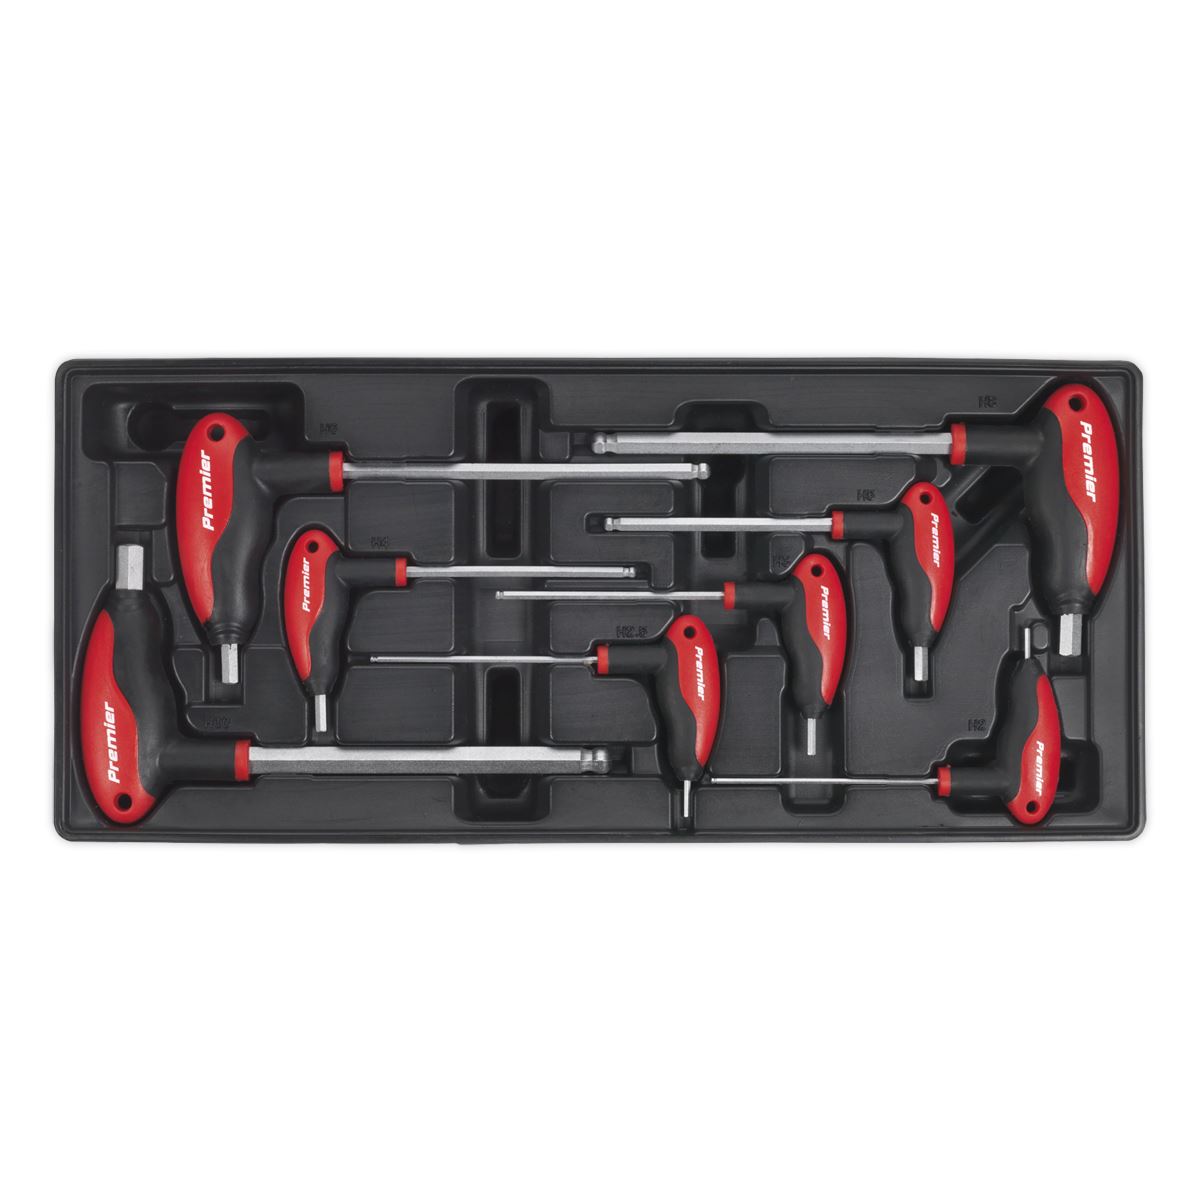 Sealey Premier Tool Tray with T-Handle Ball-End Hex Key Set 8pc